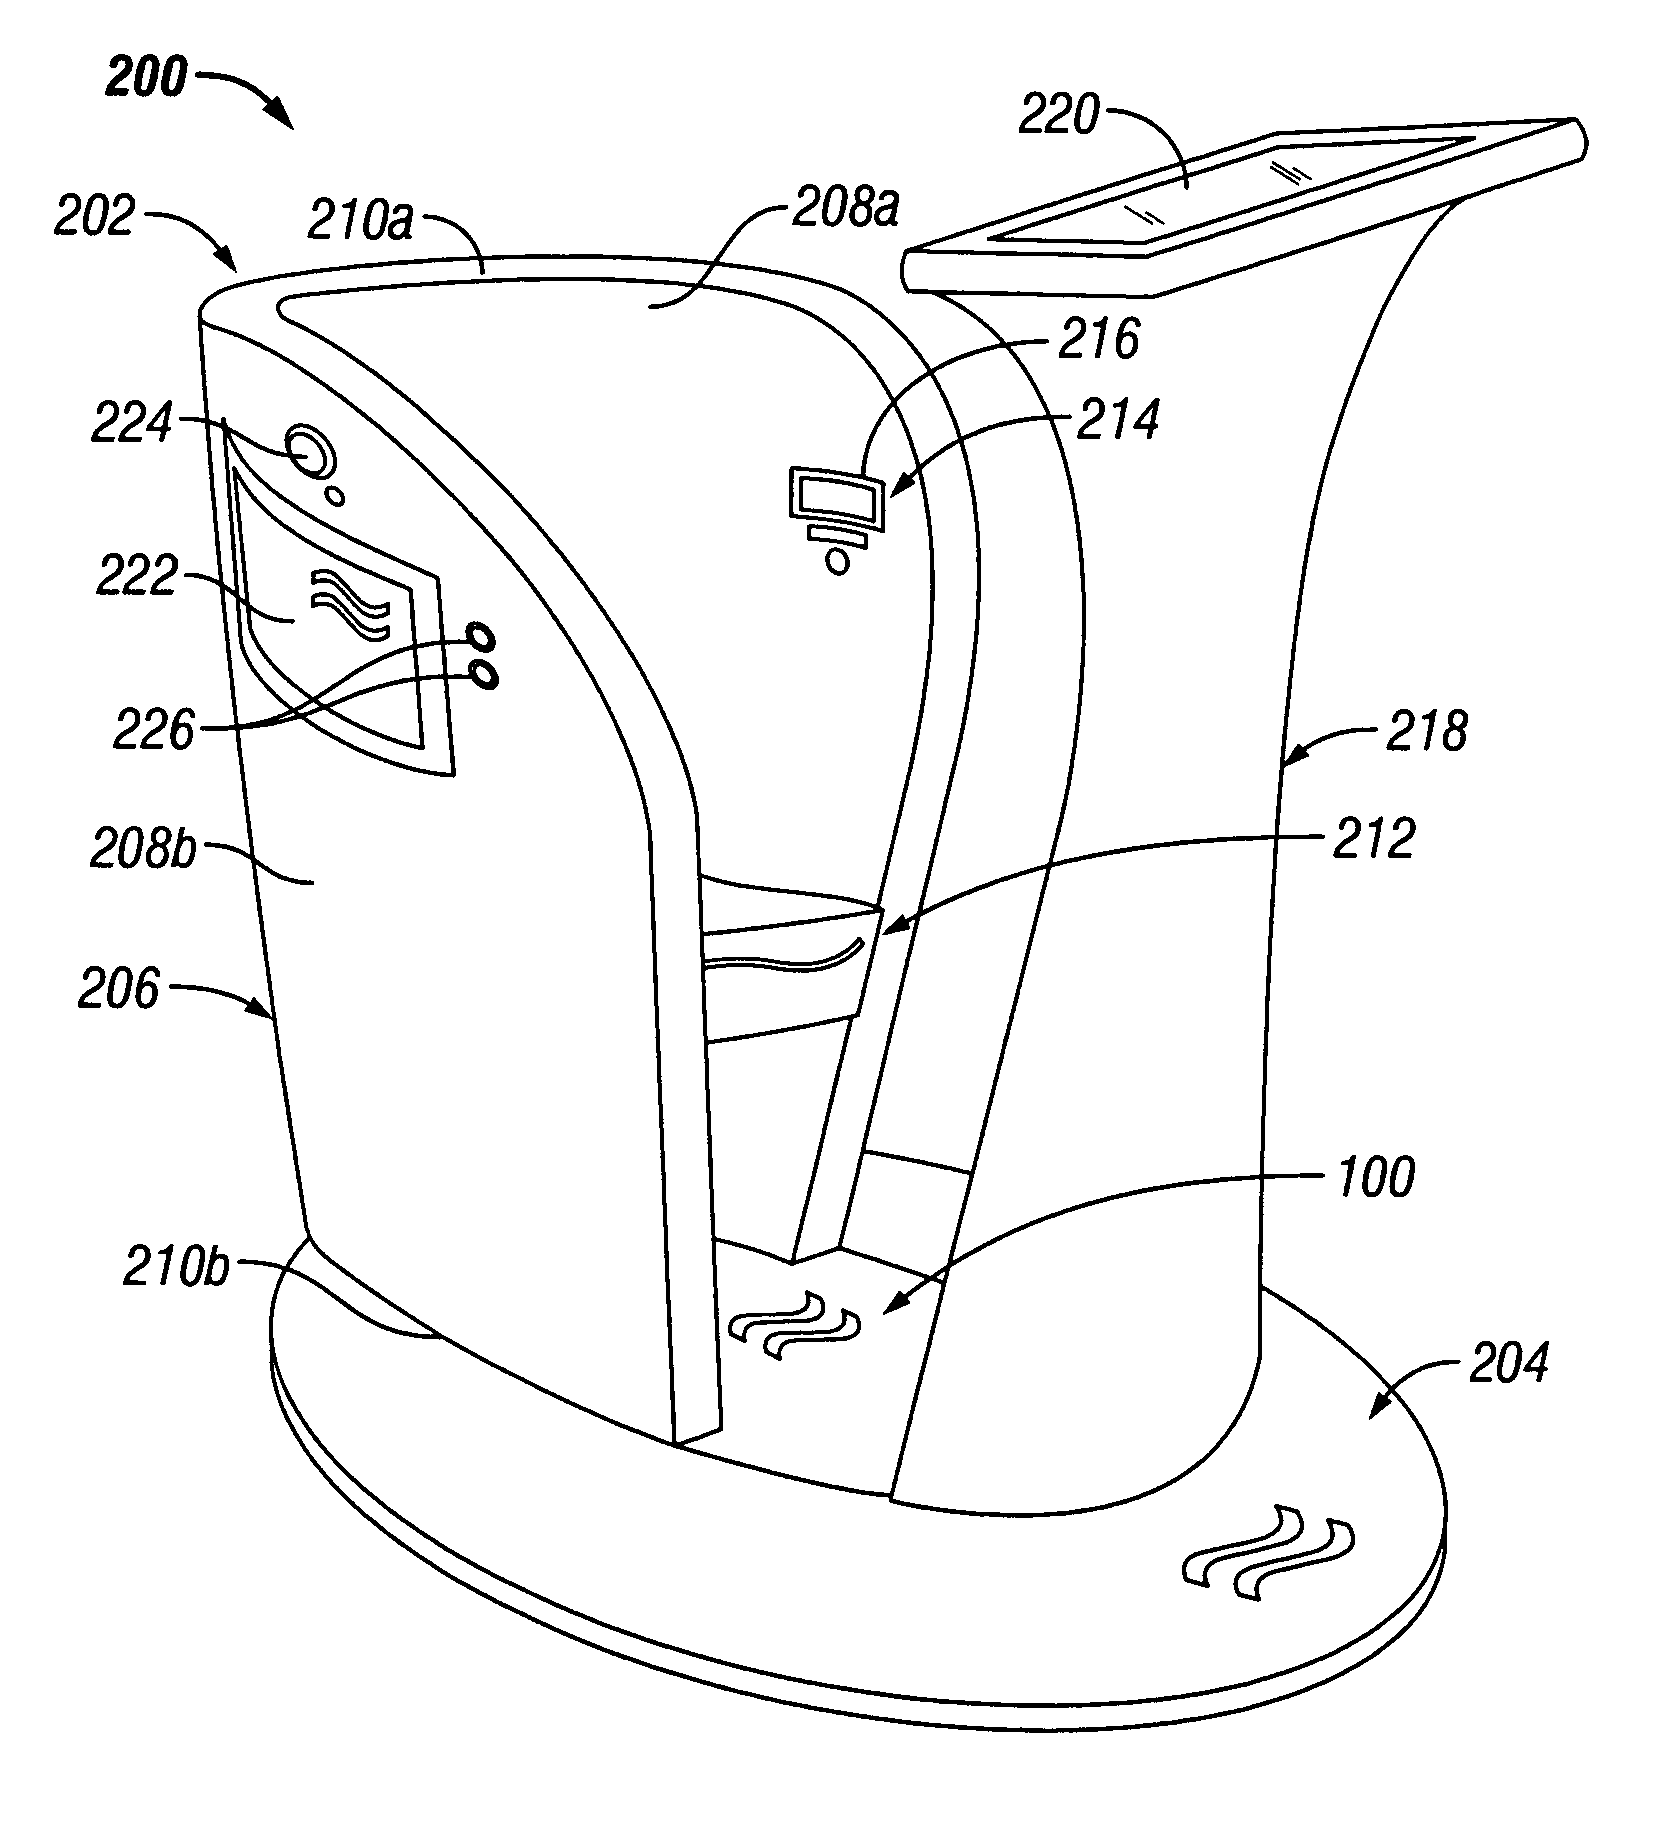 Method and apparatus for monitoring patient compliance during dynamic motion therapy